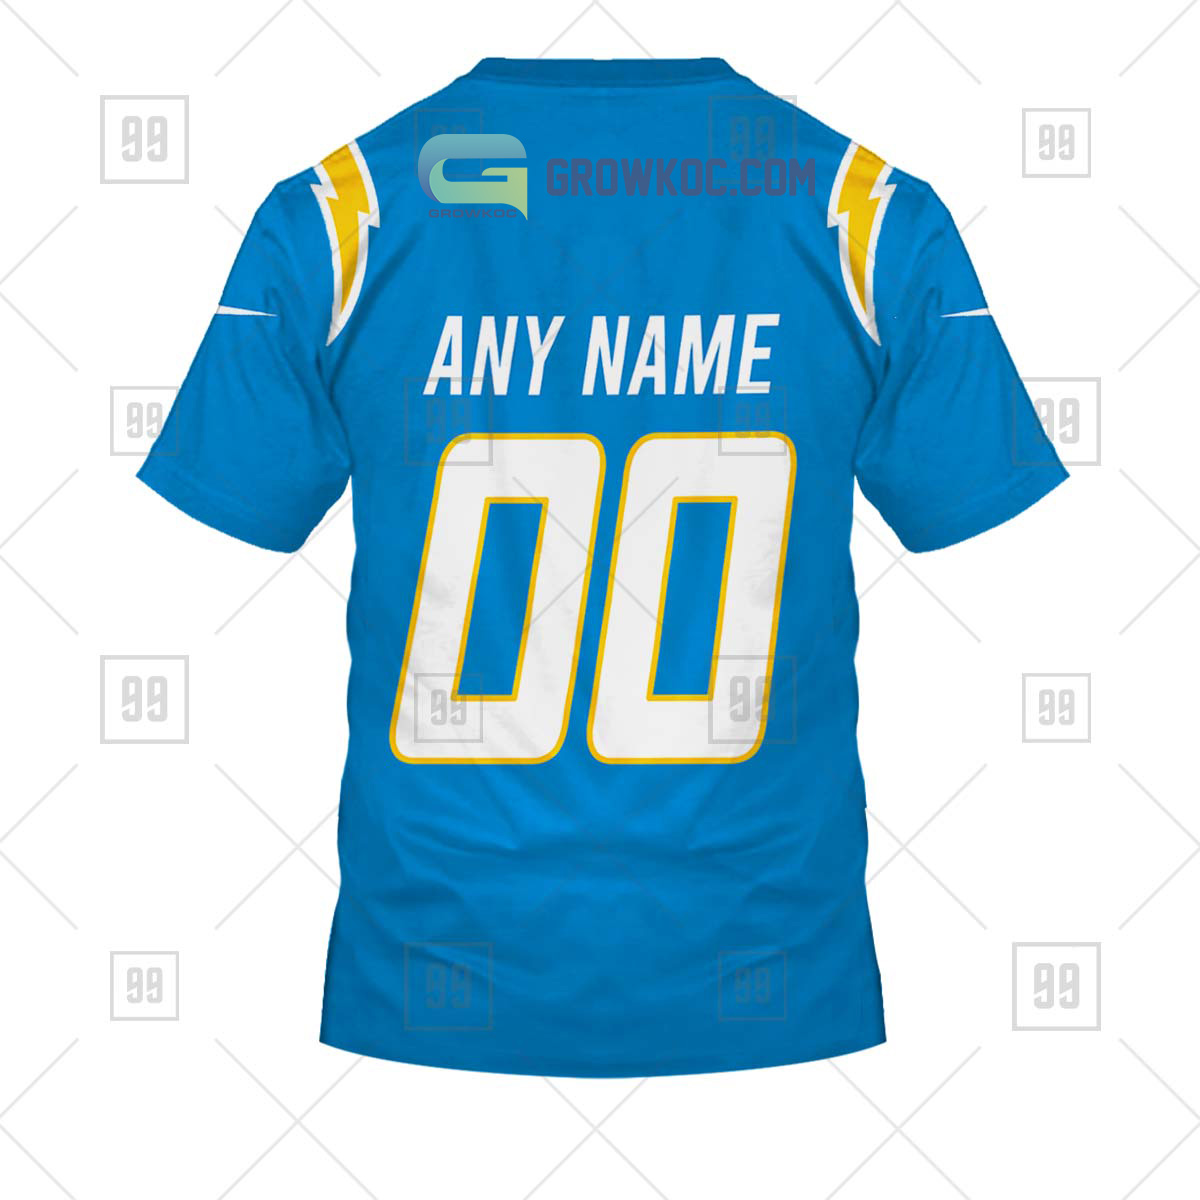 Los Angeles Chargers NFL Personalized Home Jersey Hoodie T Shirt - Growkoc